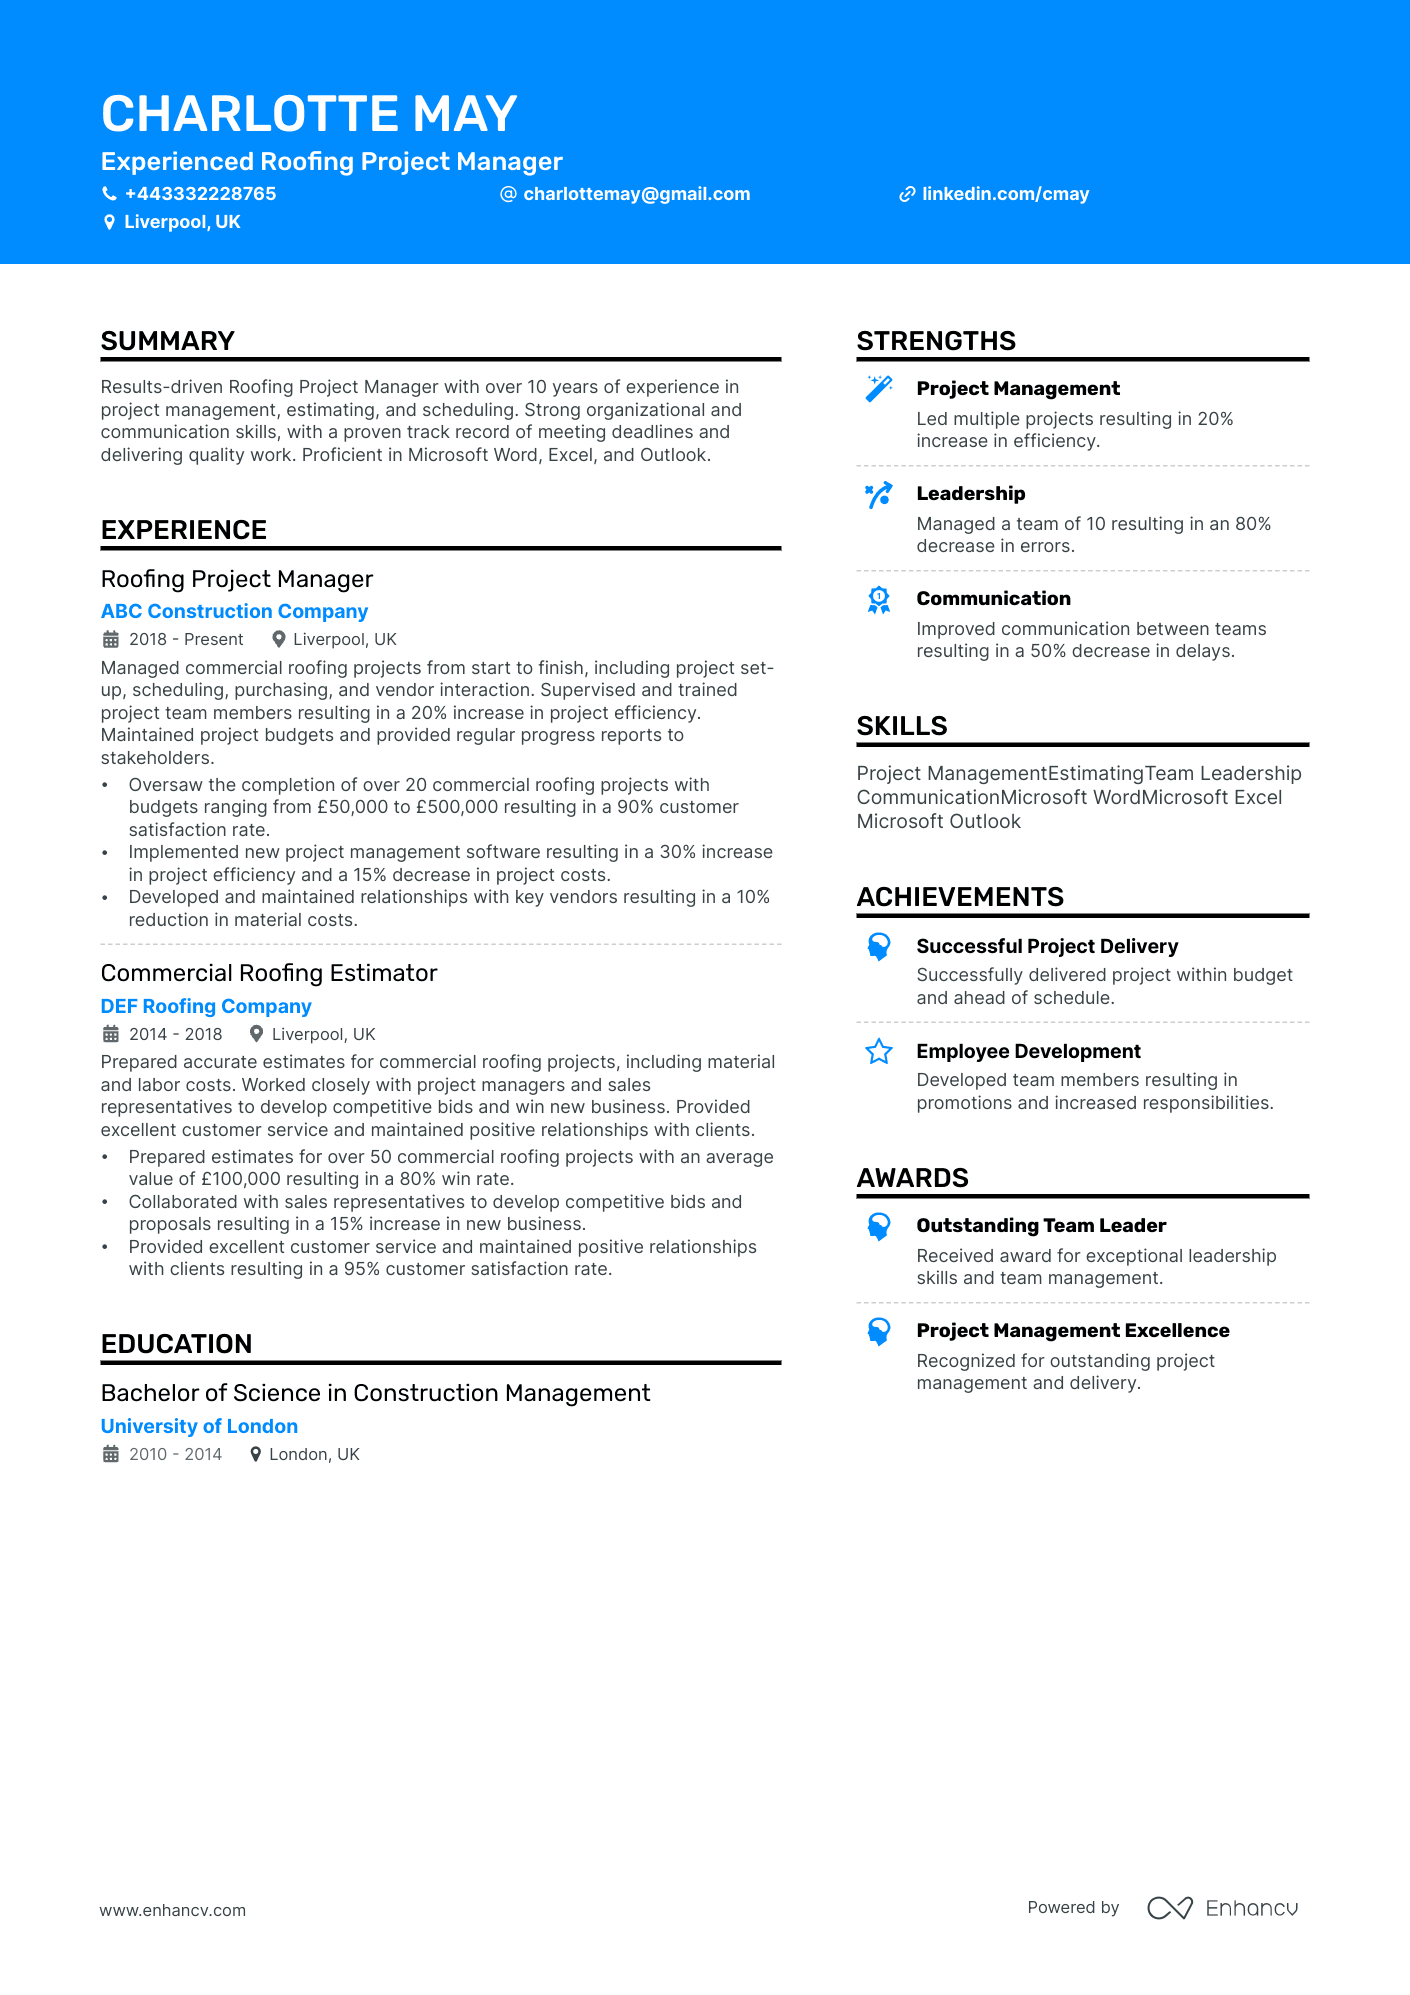 Experienced Roofing Project Manager CV example